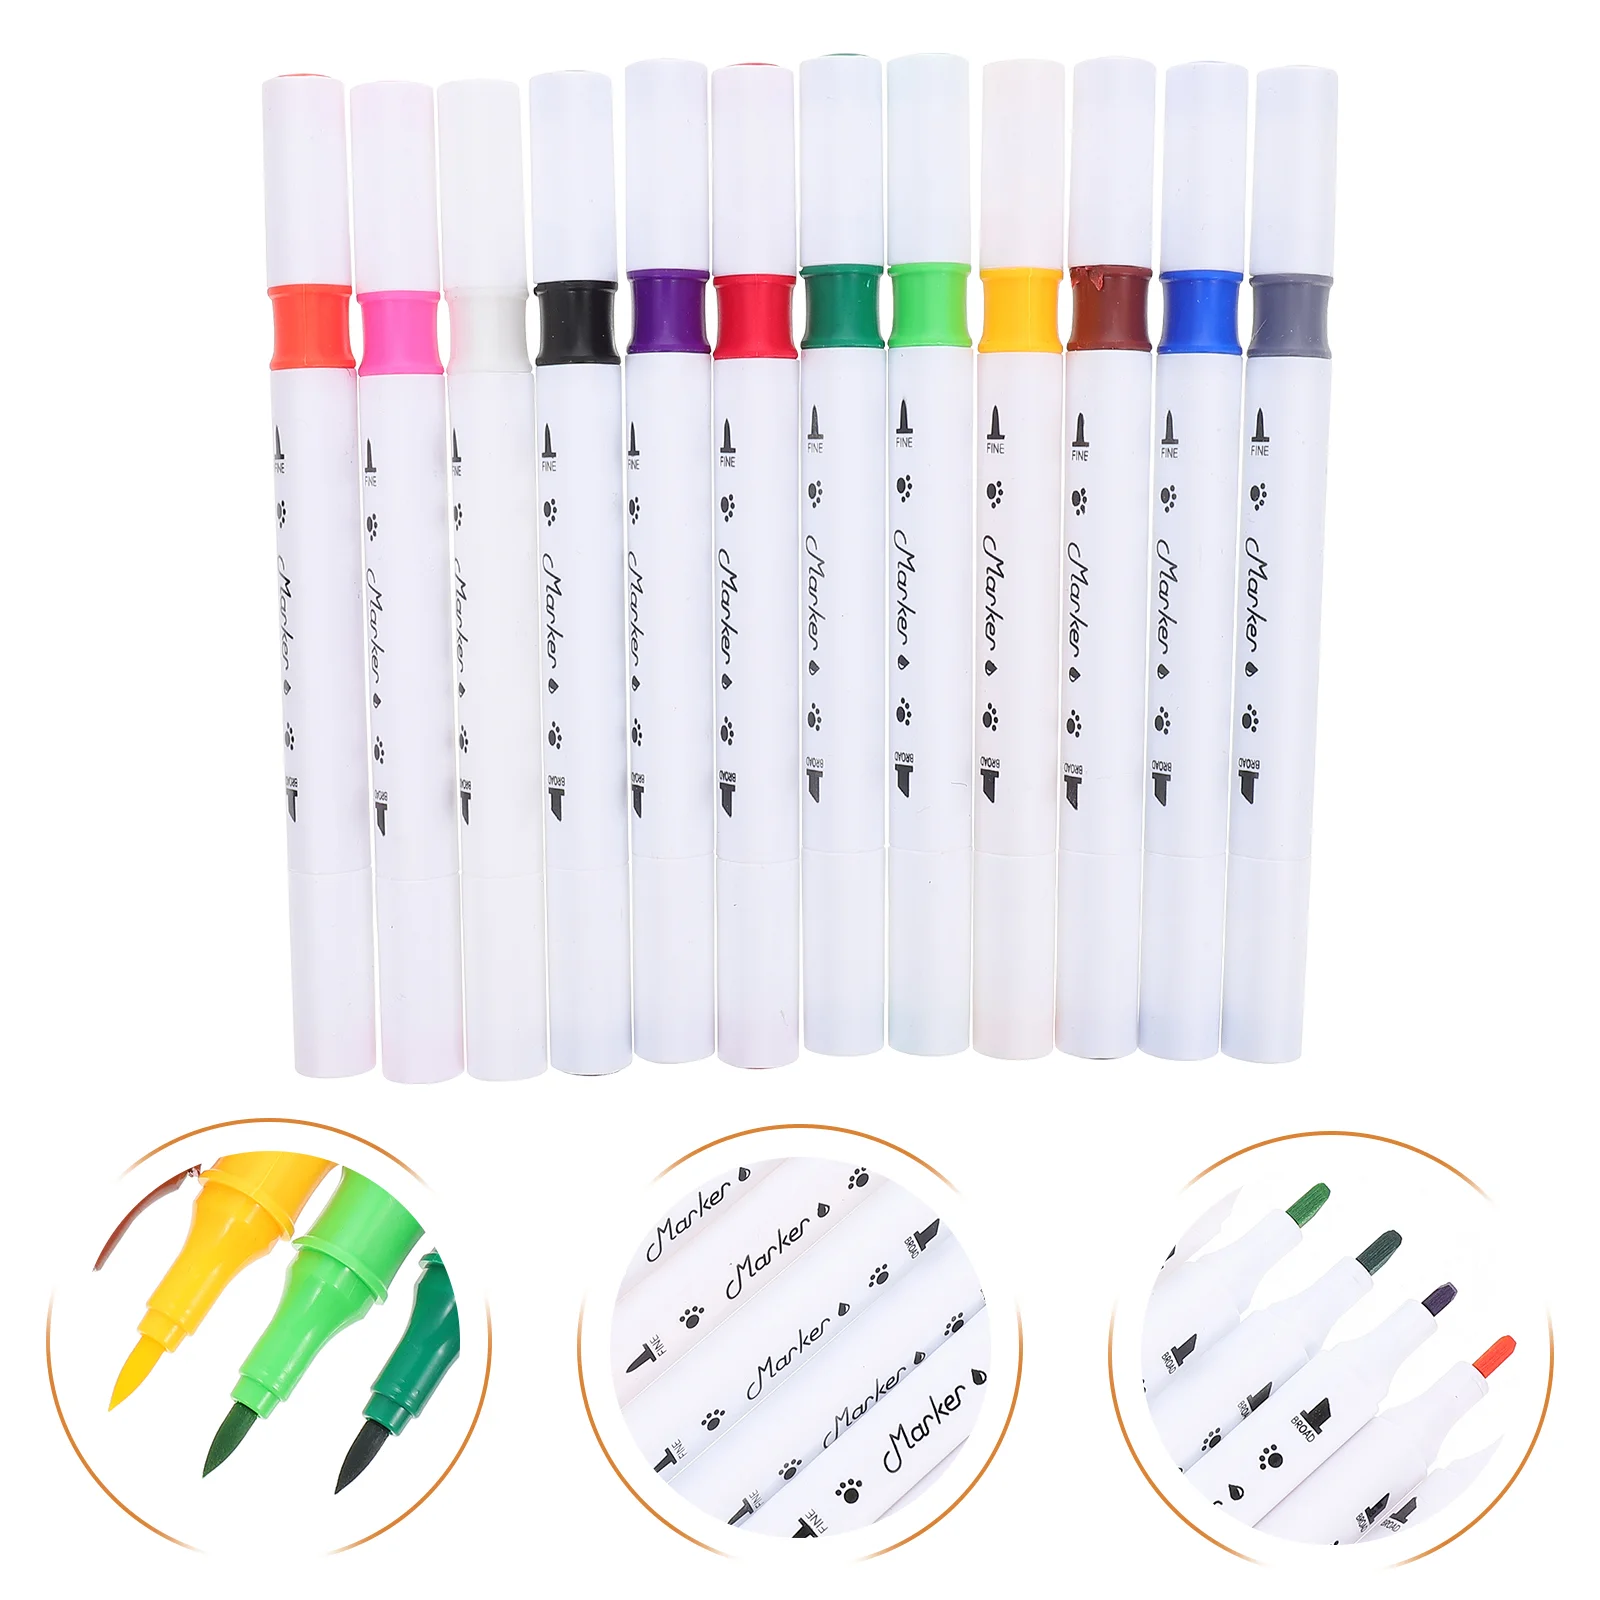 

Markers Pens Set Markerdouble Pen End Tip Dual Coloring Forart Colored Watercolor Drawingcase Painting Based Color Fine Headed